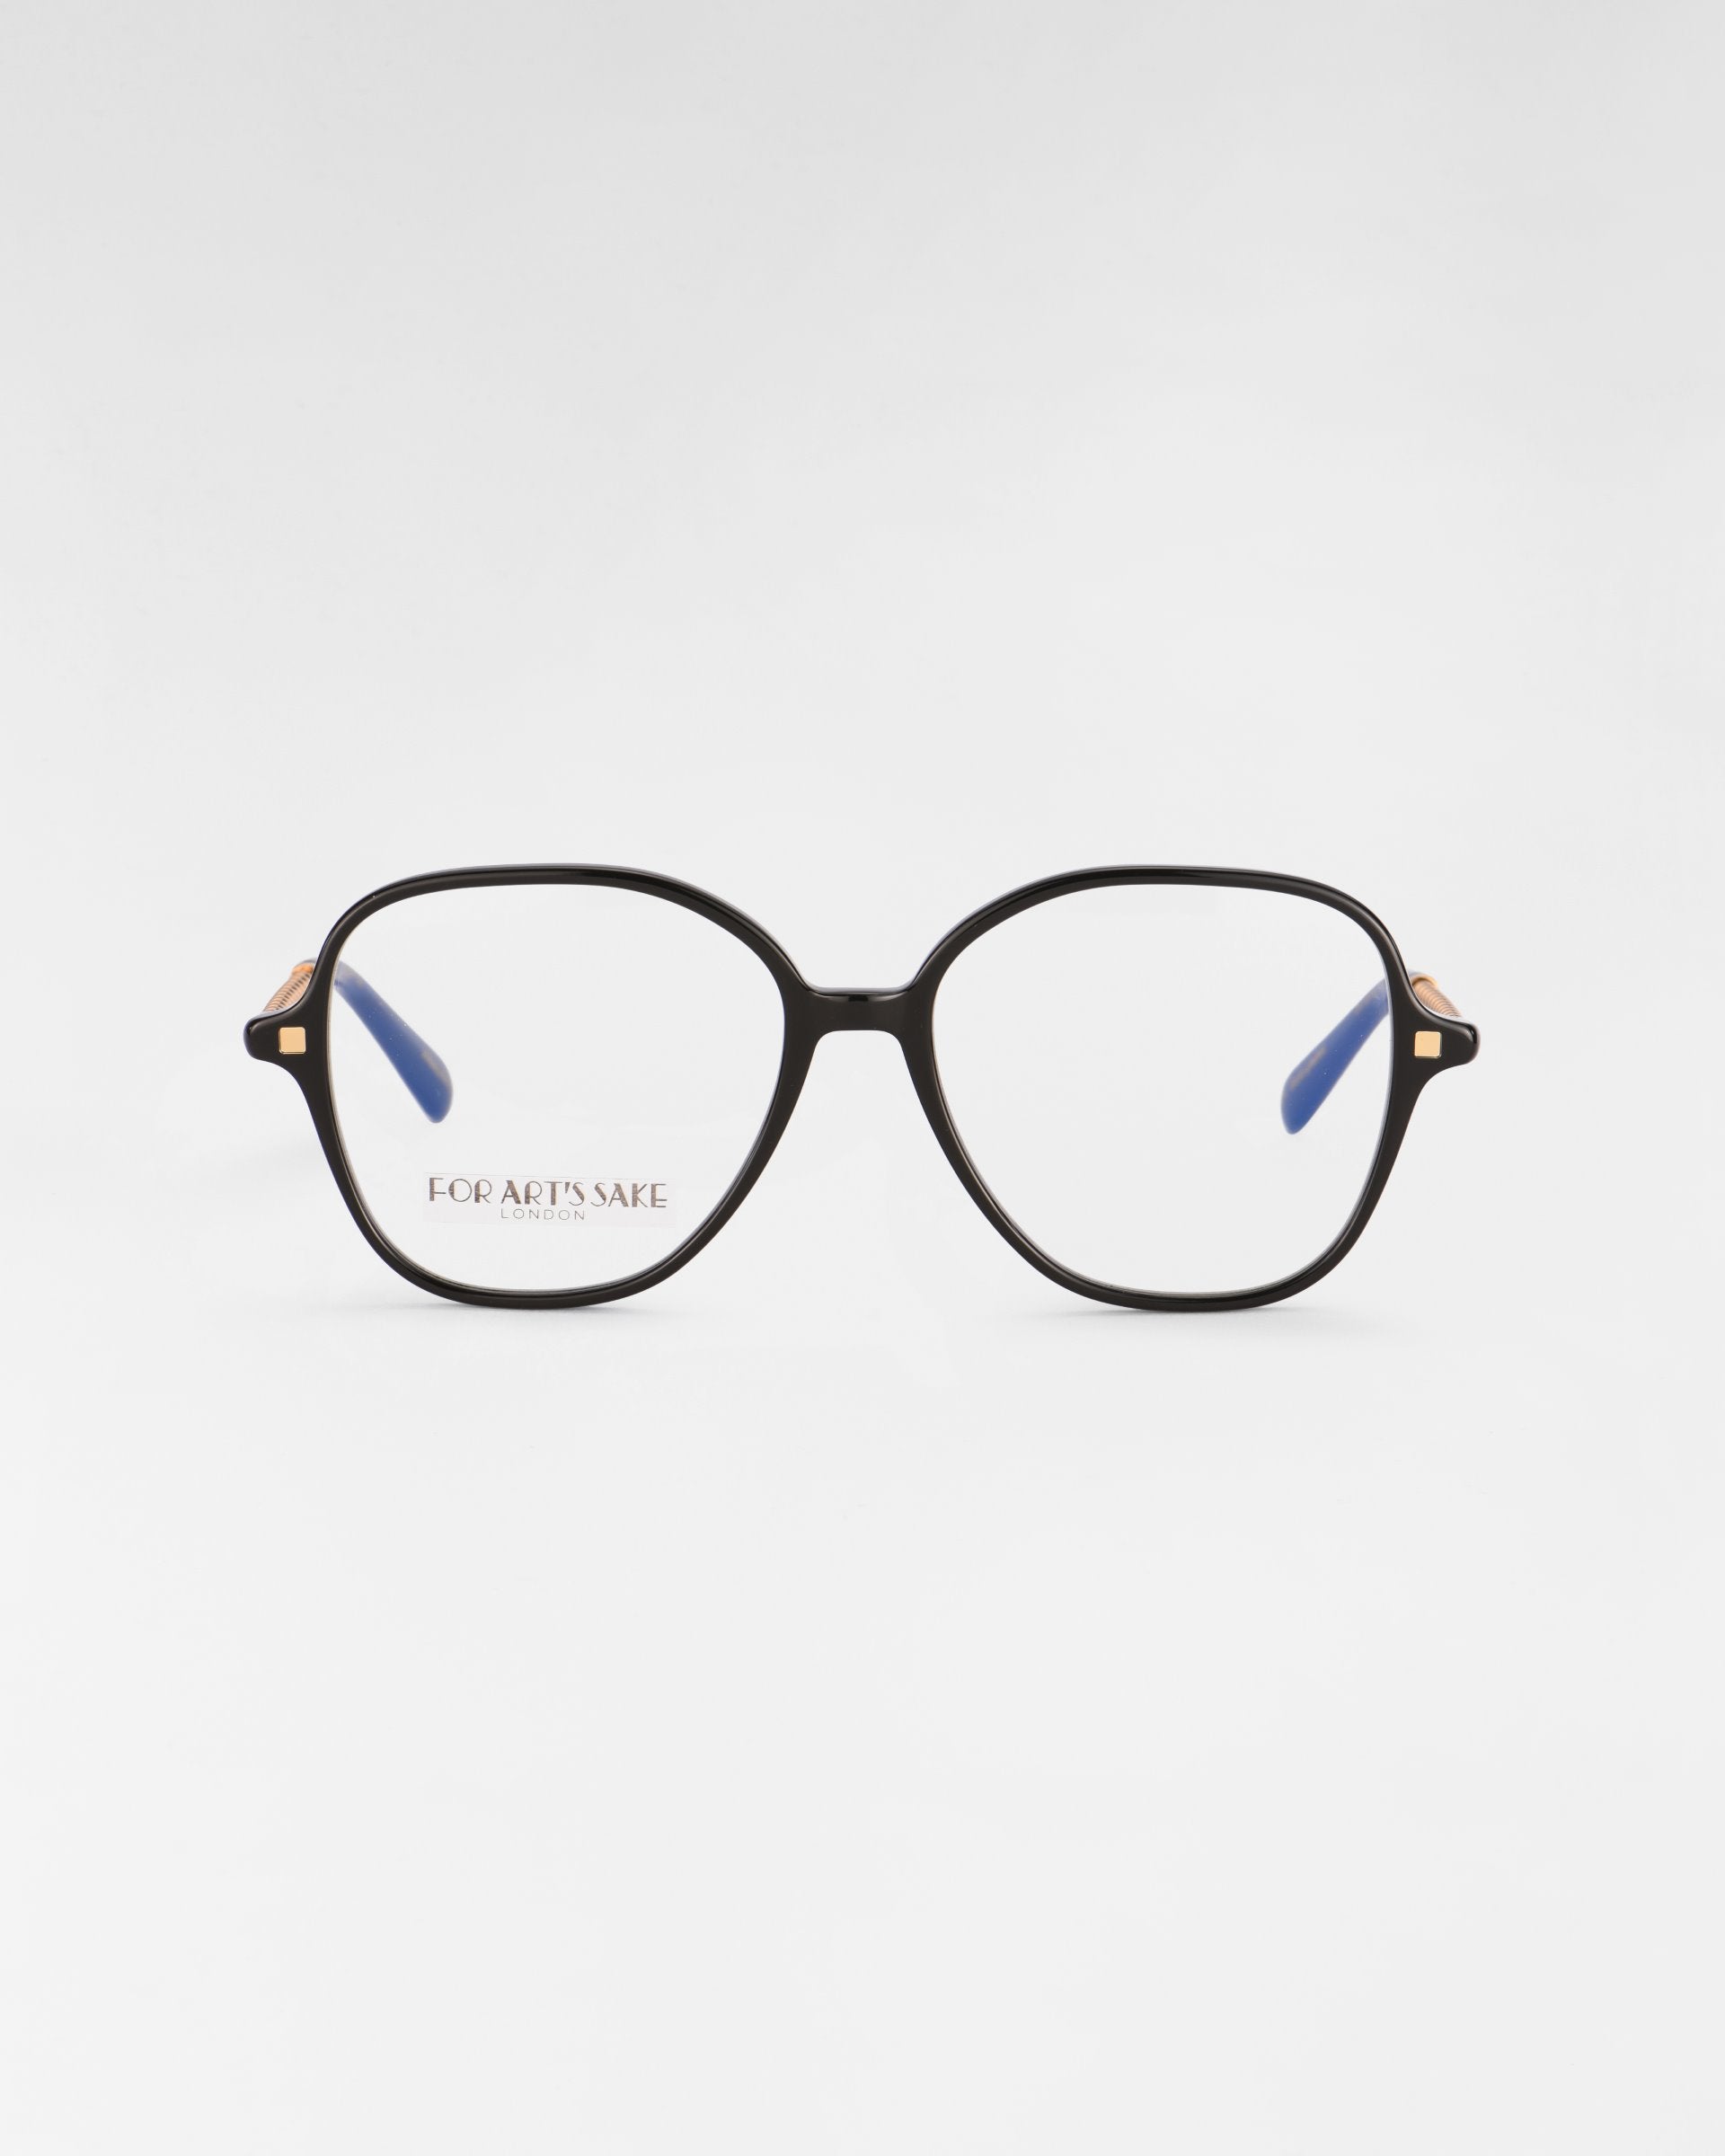 A pair of black-rimmed Dumpling eyeglasses with a slight geometric shape. The glasses have clear lenses featuring a blue light filter, and the inside arms are blue. The words "For Art's Sake®" are visible on the left lens. The glasses are set against a plain white background.